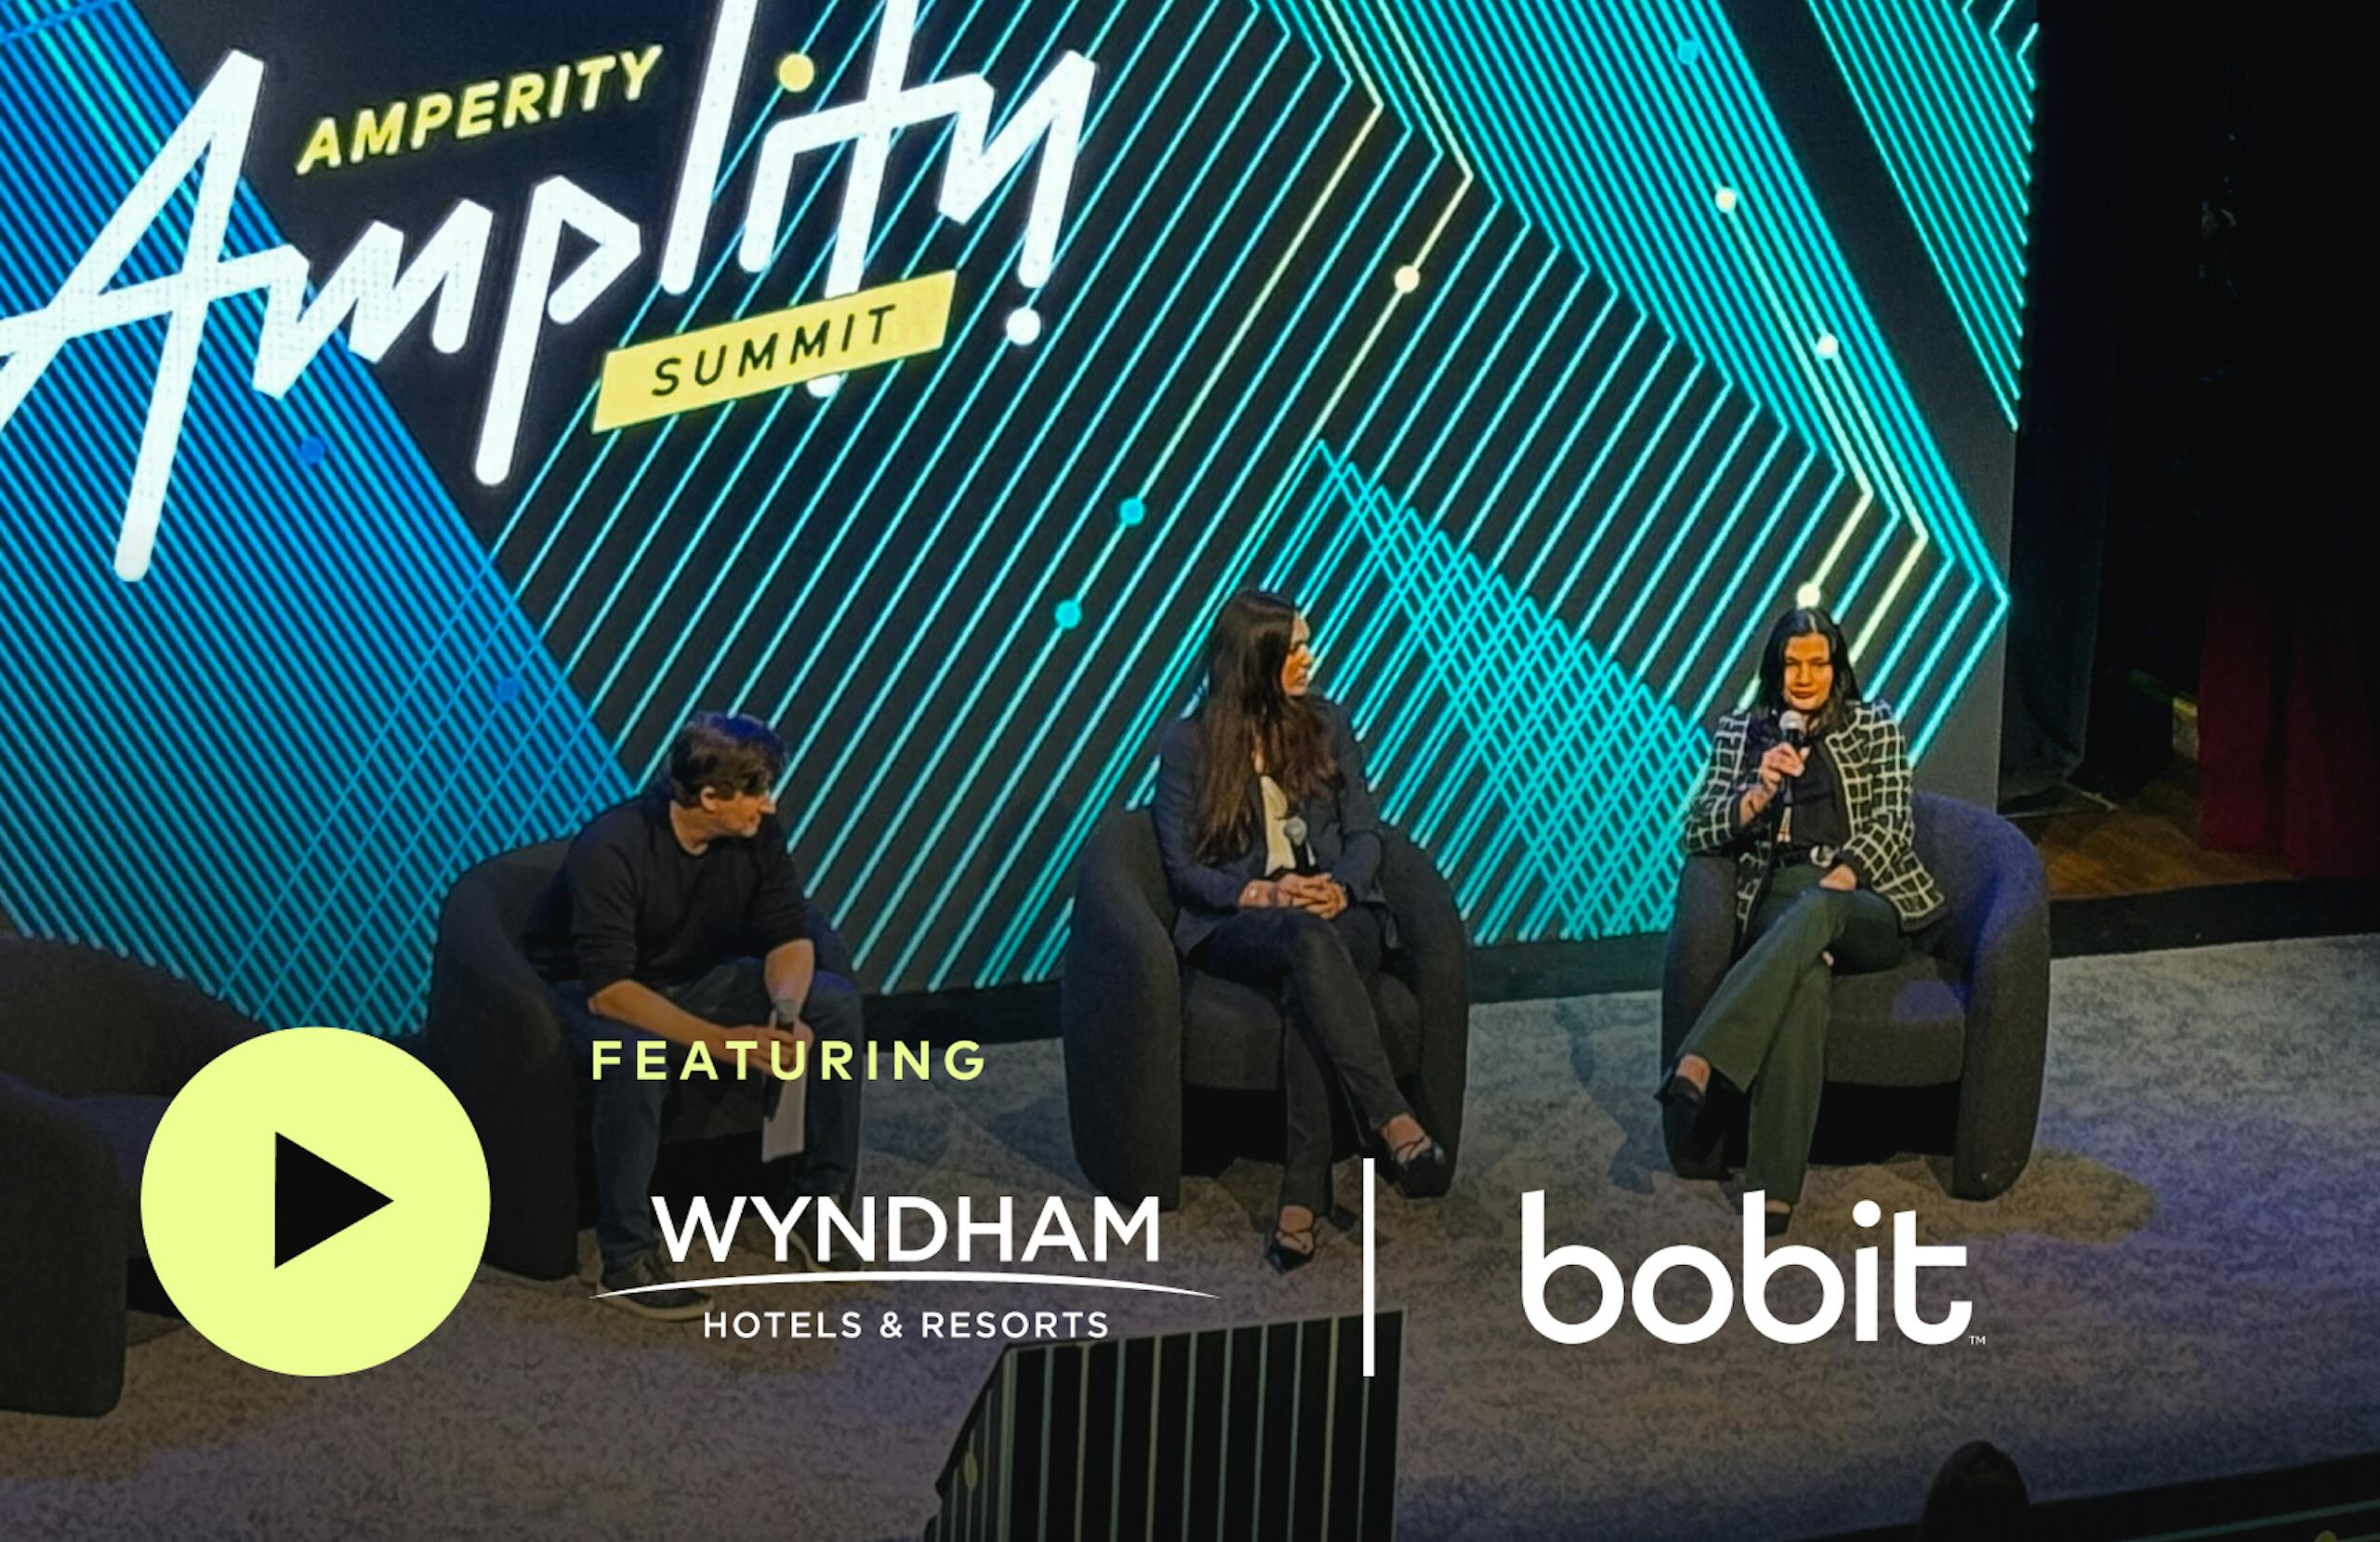 Three figures onstage at Amperity Amplify Summit. Featuring Wyndham Hotels & Resorts and Bobit.